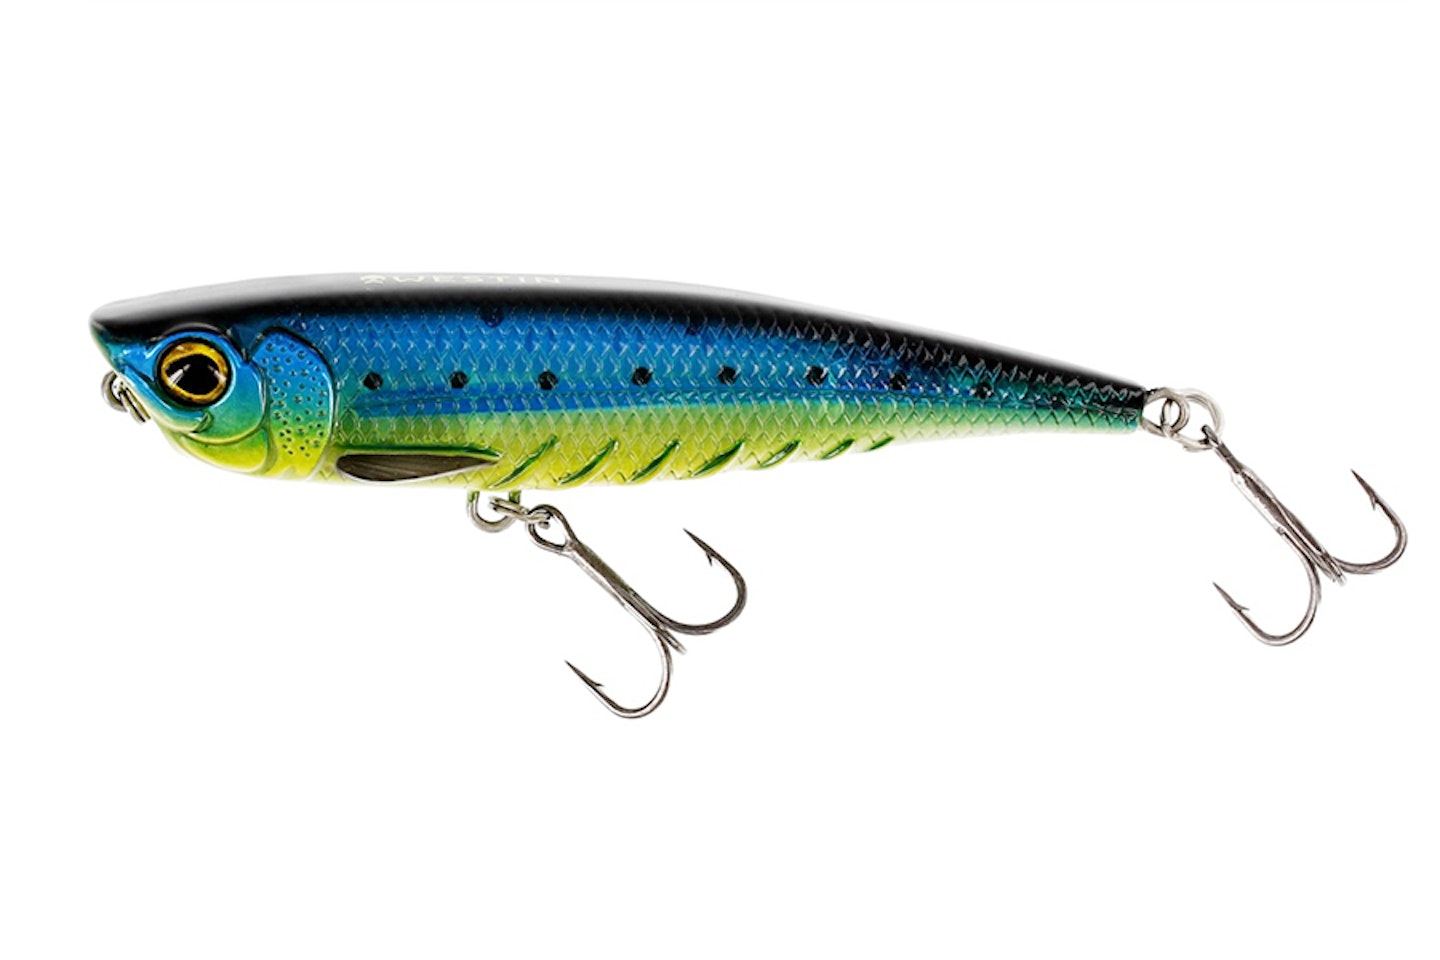 The best pike lures